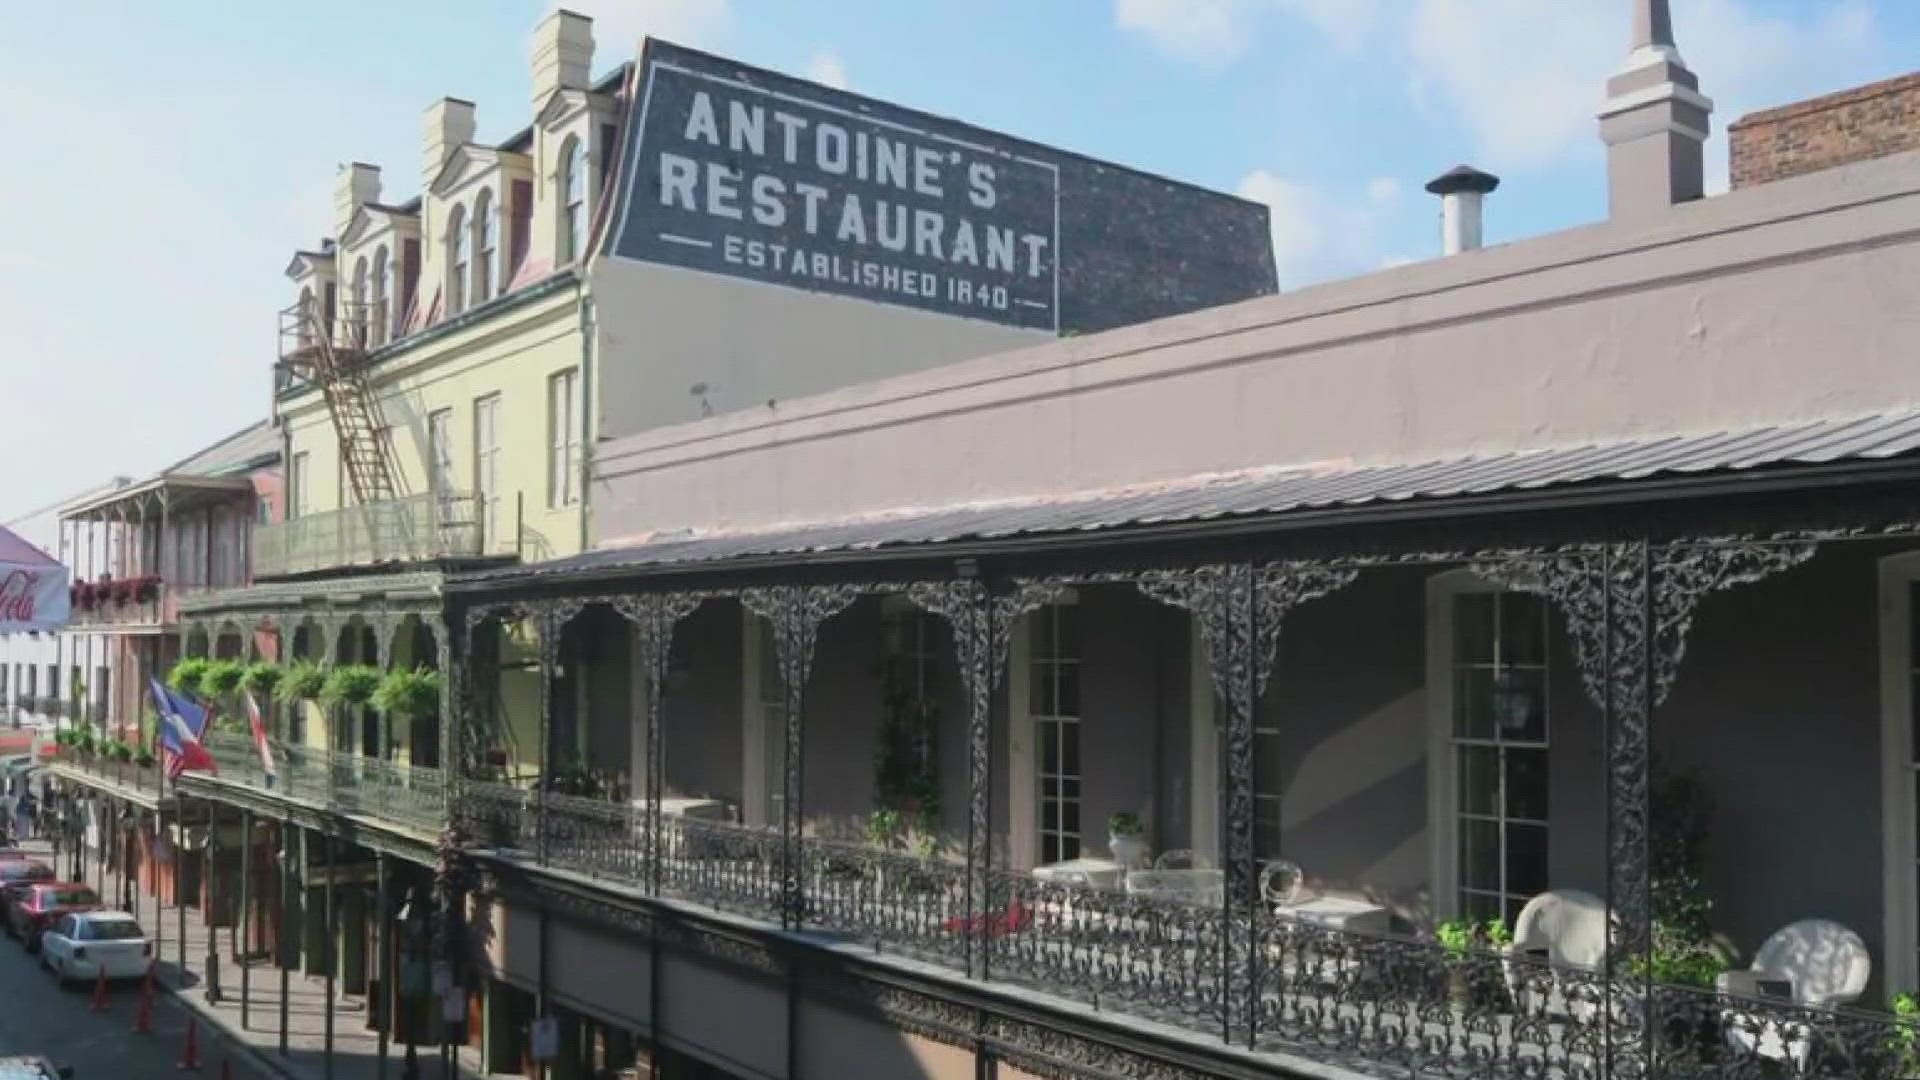 A new campaign launched by New Orleans and Company is designed to provide extra support to local restaurants struggling to stay open.